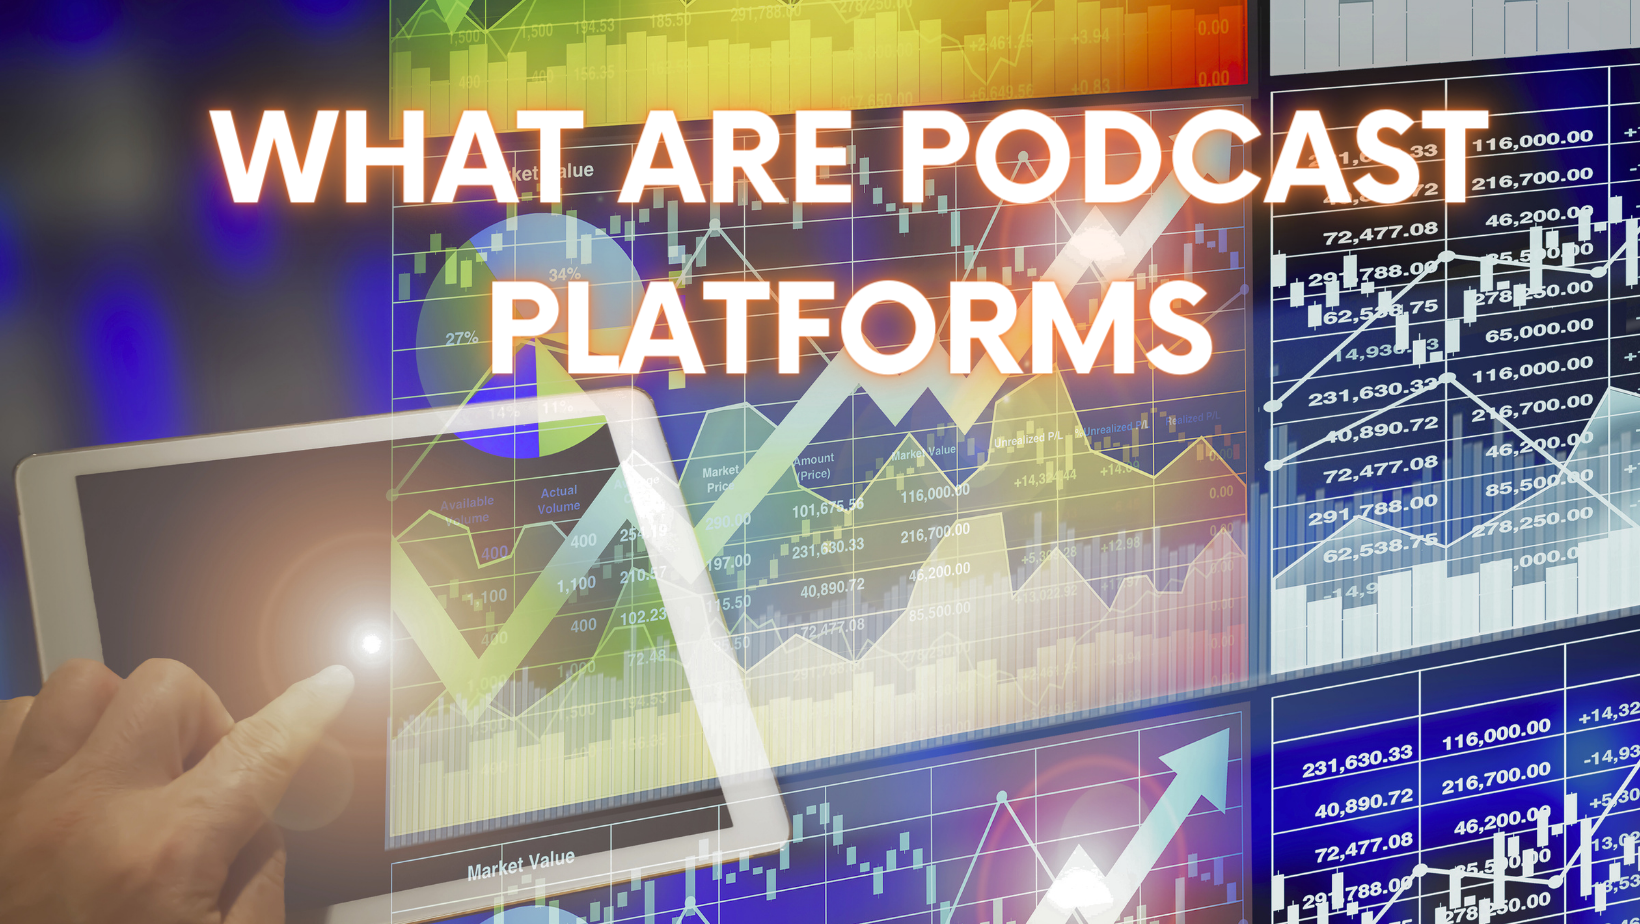 What are podcast platforms